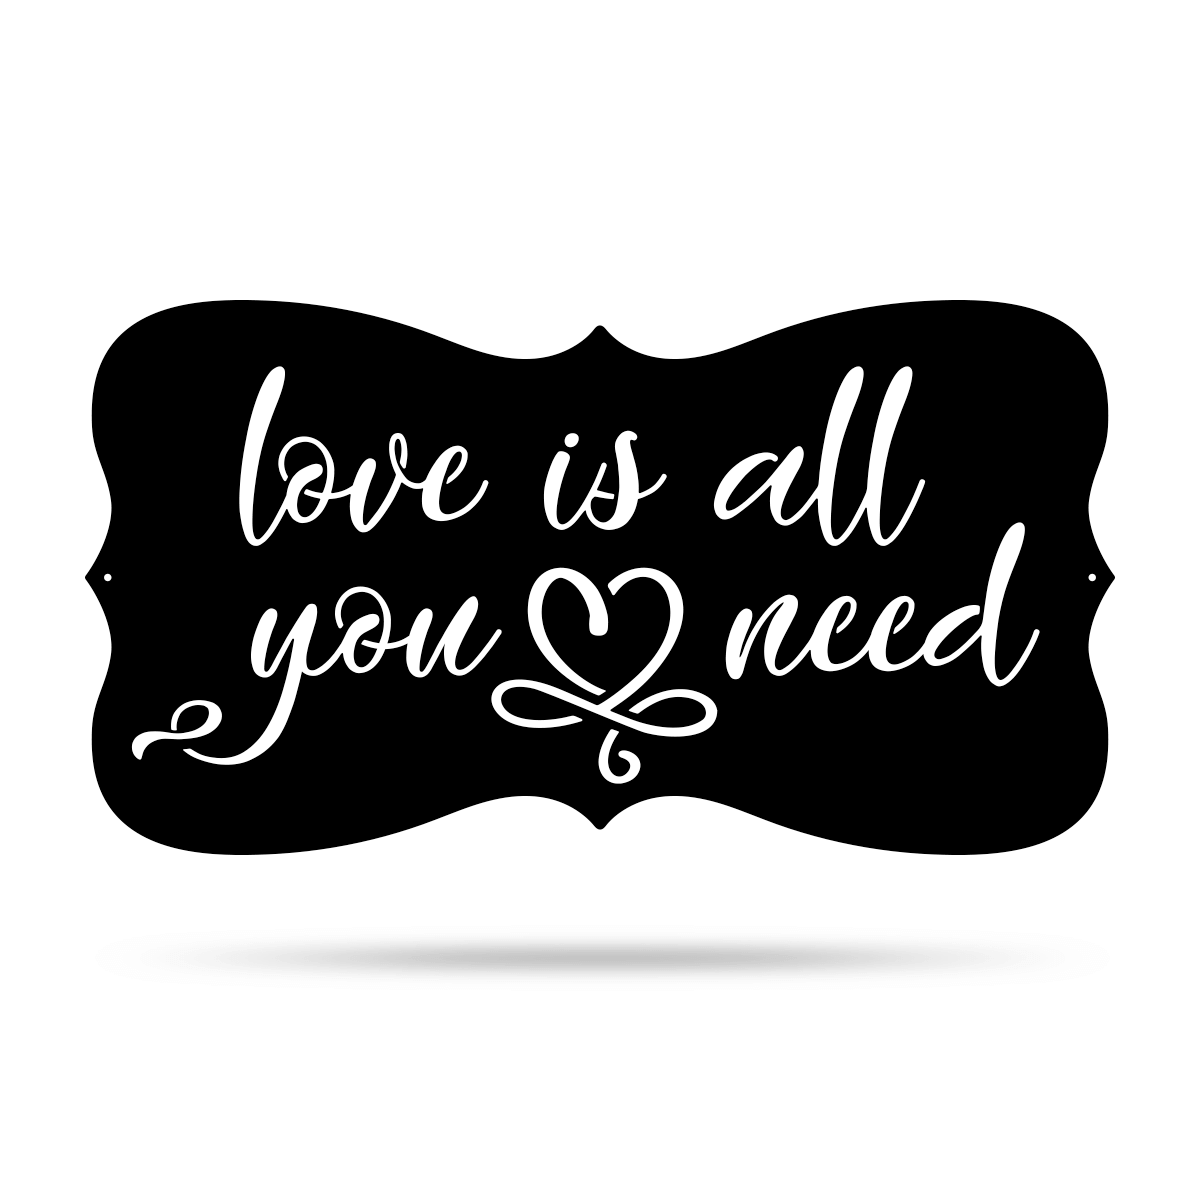 Love Is All You Need Wall Art  - RealSteel Center